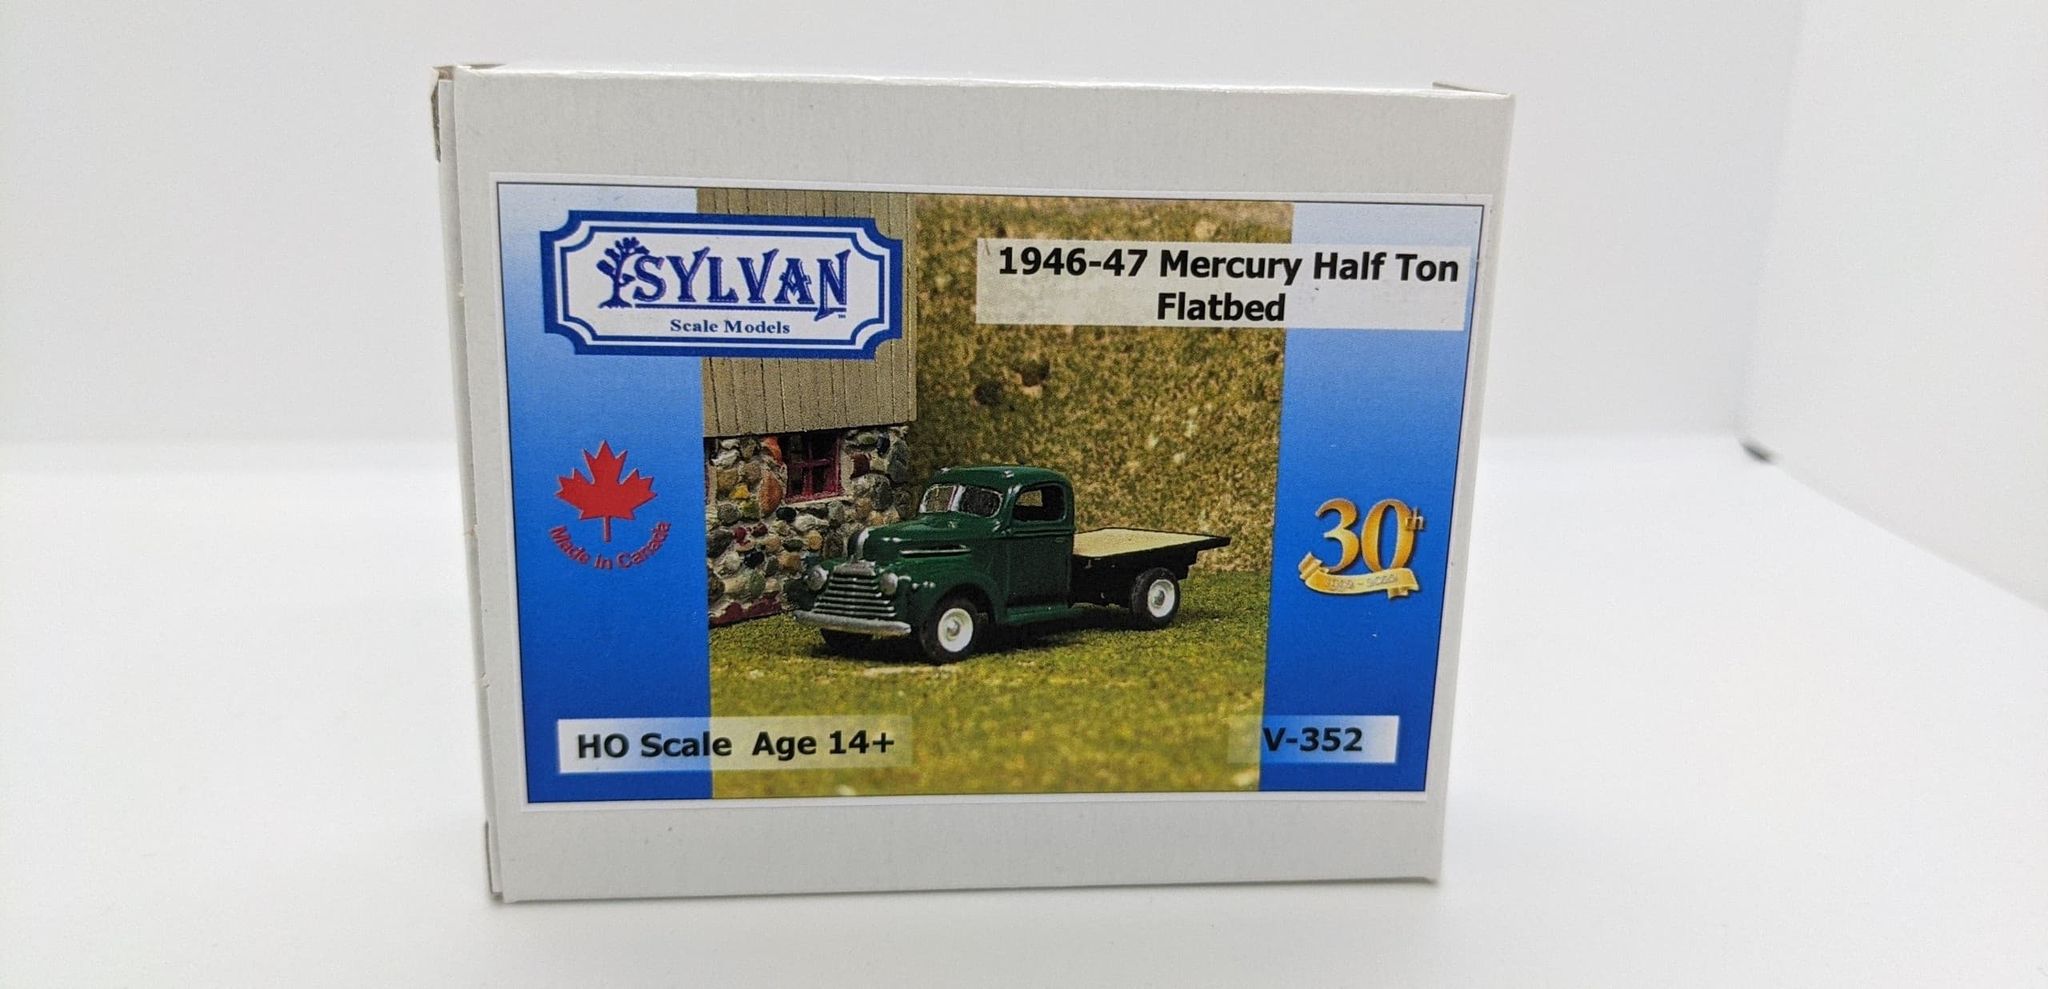 Sylvan Scale Models V-352 HO Scale - 46/47 Mercury Half Ton Flatbed- Unpainted and Resin Cast Kit